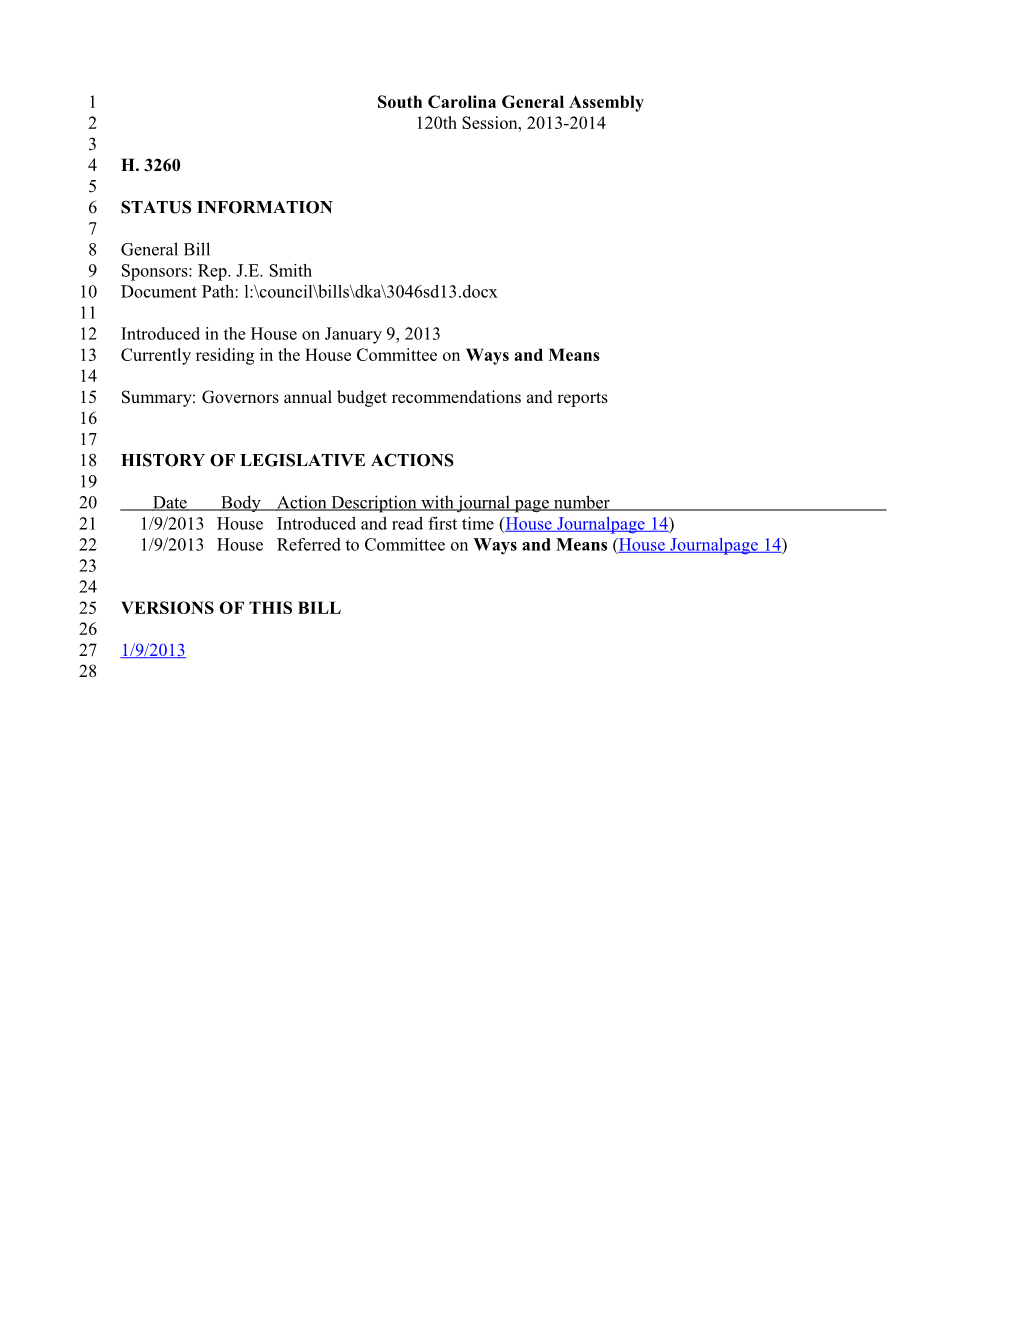 2013-2014 Bill 3260: Governors Annual Budget Recommendations and Reports - South Carolina